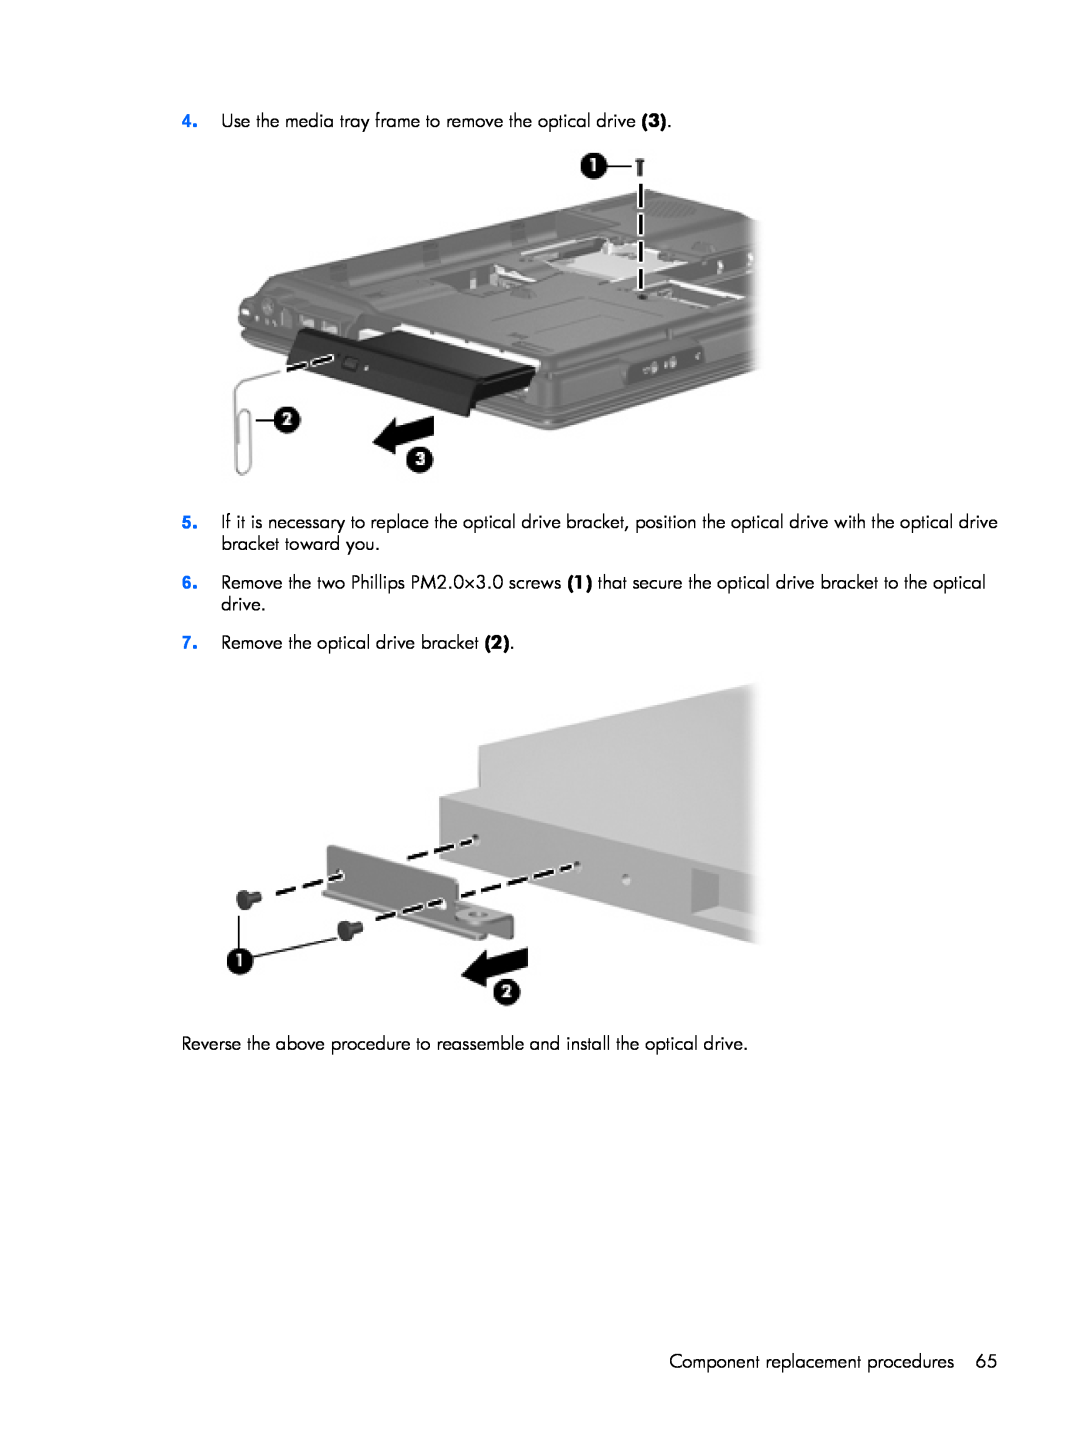 HP V3664TU, V3523TU, V3930TU, V3931TU Use the media tray frame to remove the optical drive, Remove the optical drive bracket 